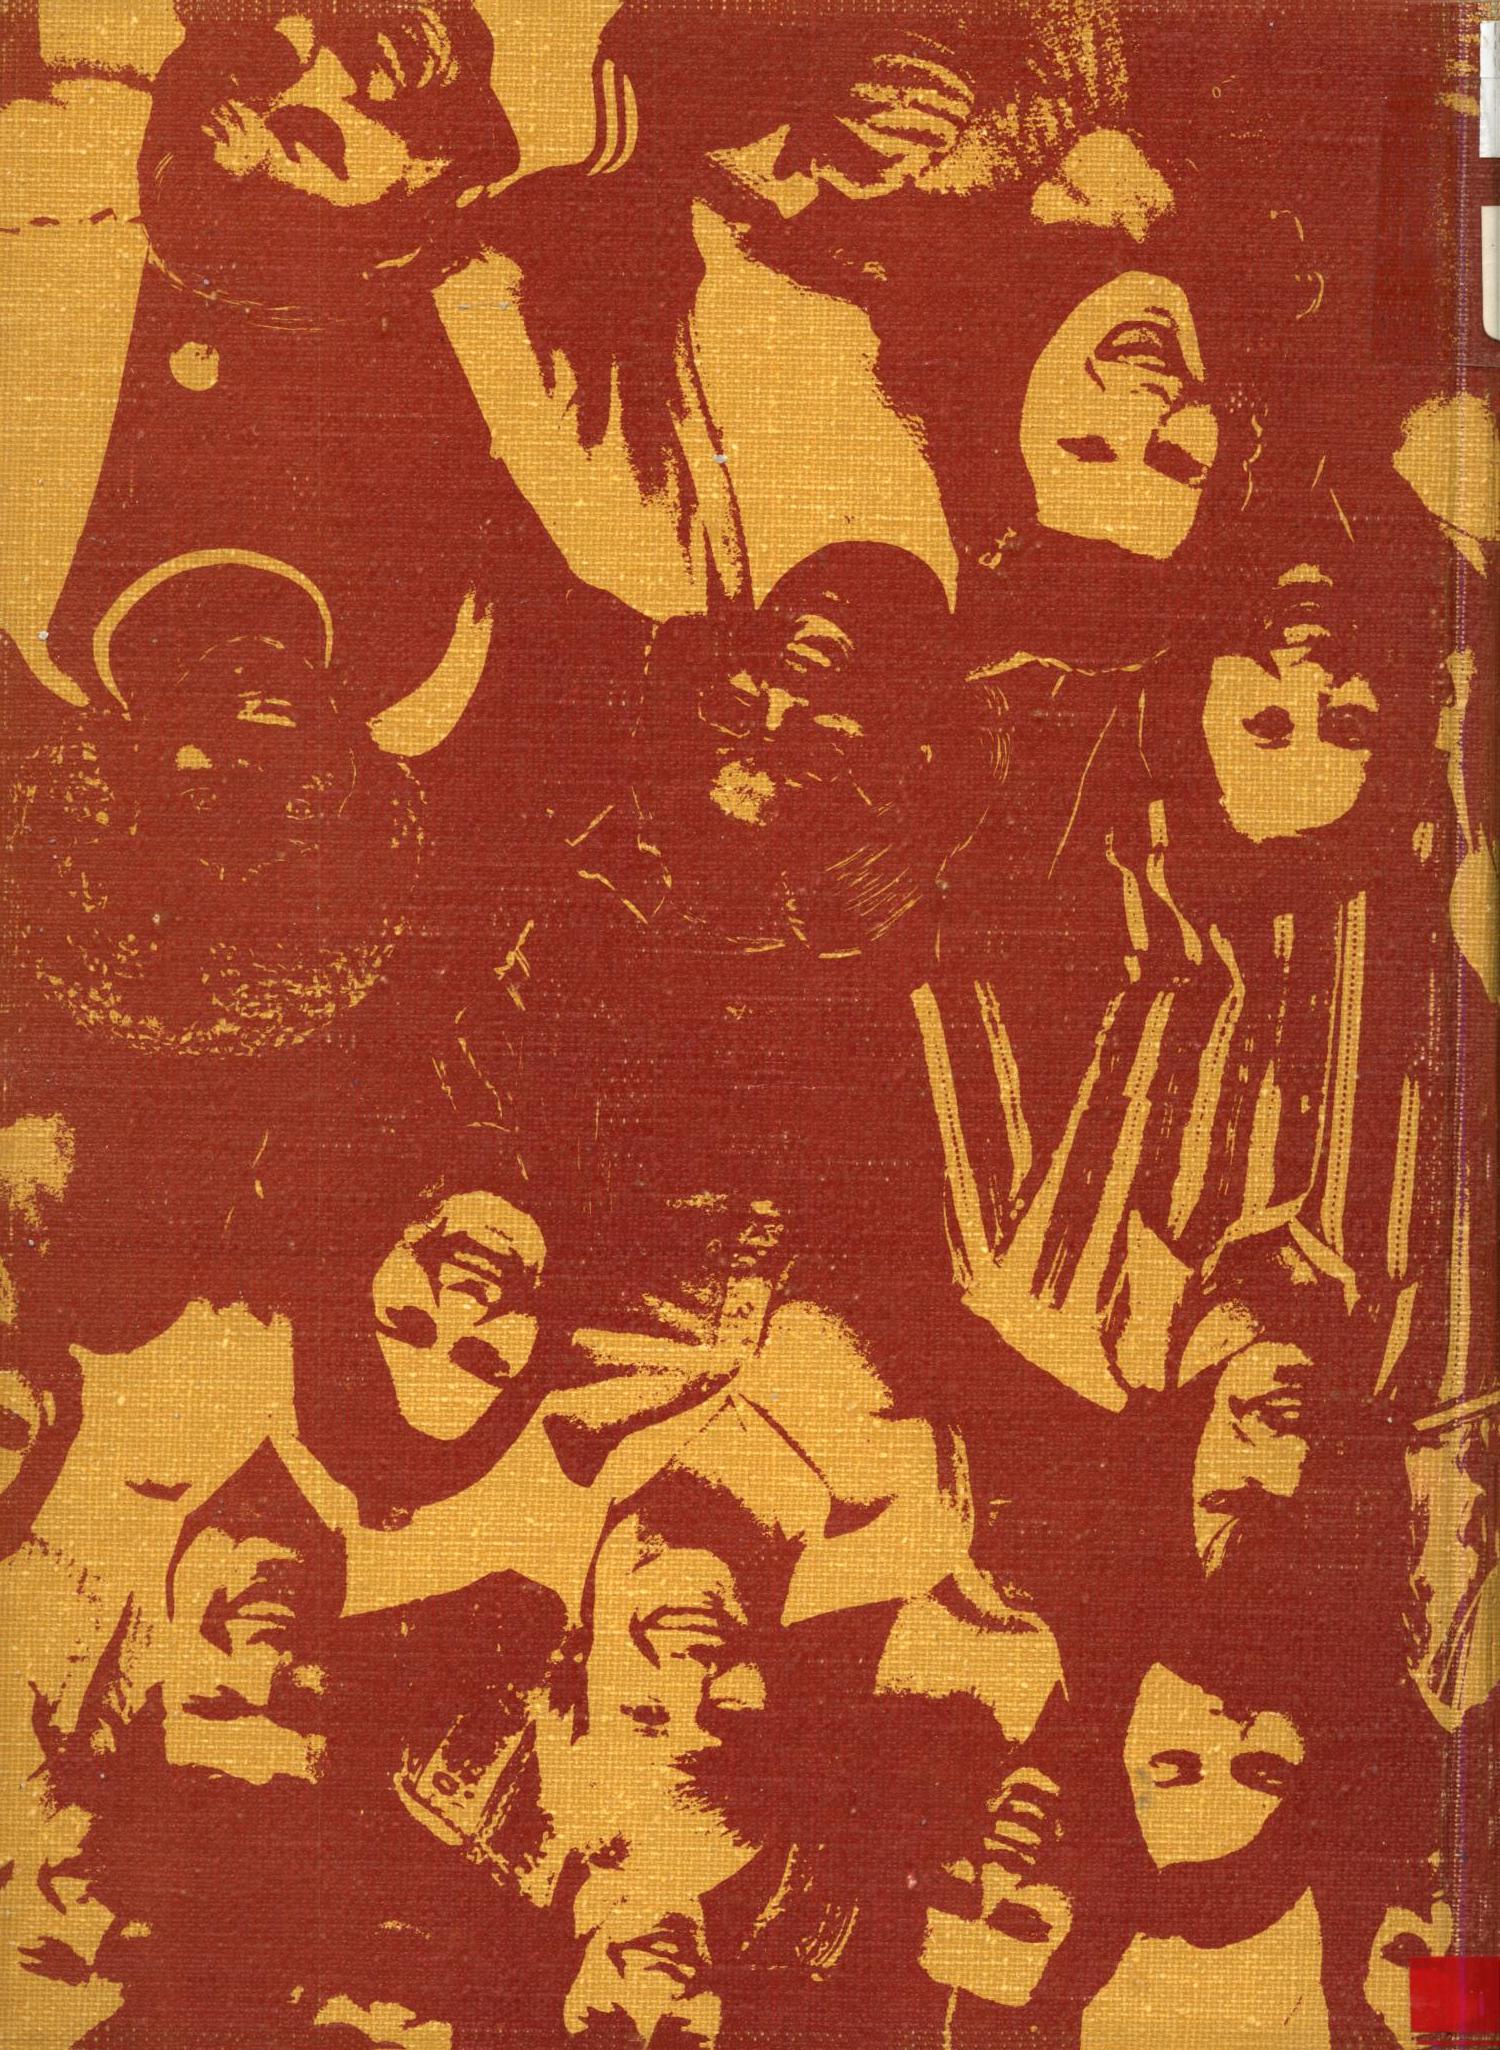 The Yellow Jacket, Yearbook of Thomas Jefferson High School, 1972
                                                
                                                    Front Cover
                                                